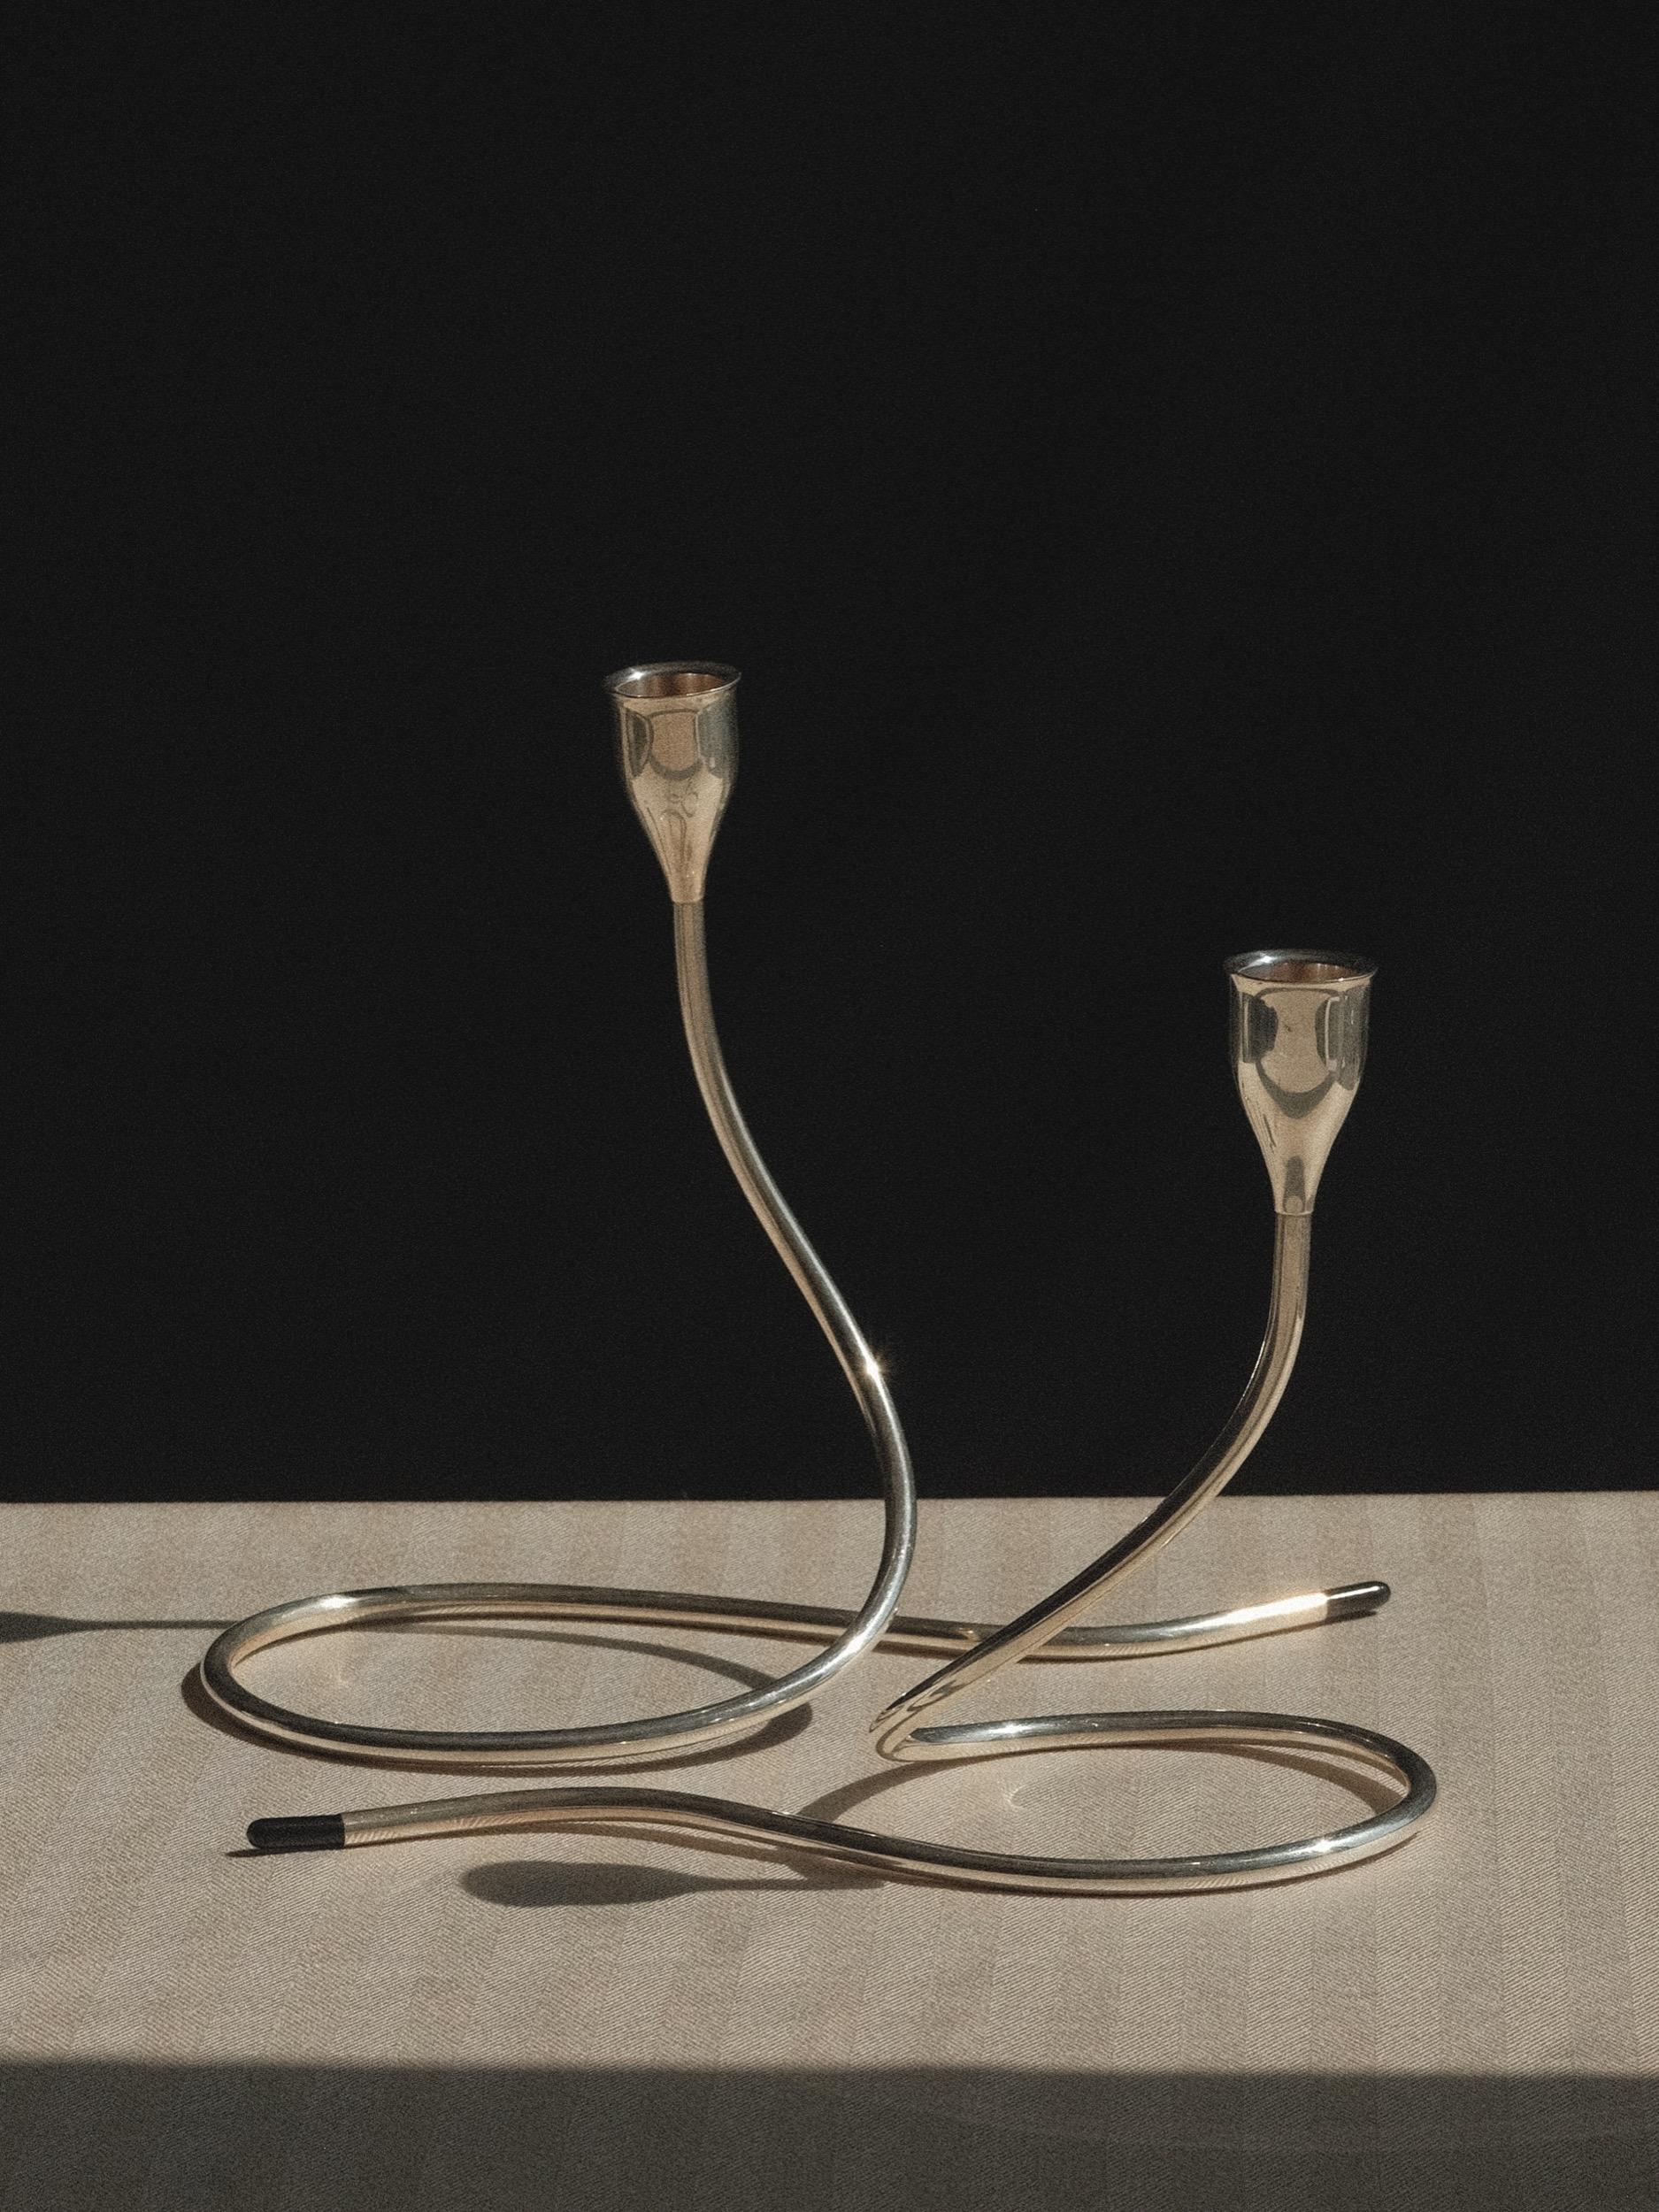 Pair of two Serpentine Candlesticks
Designed by Marion Anderson Noyes (1907-2002) for Towle Silversmiths
Flared lip candle cup sits atop tubular curving stem that can intertwine with the other romantically or stand sculpturally on its own
Black